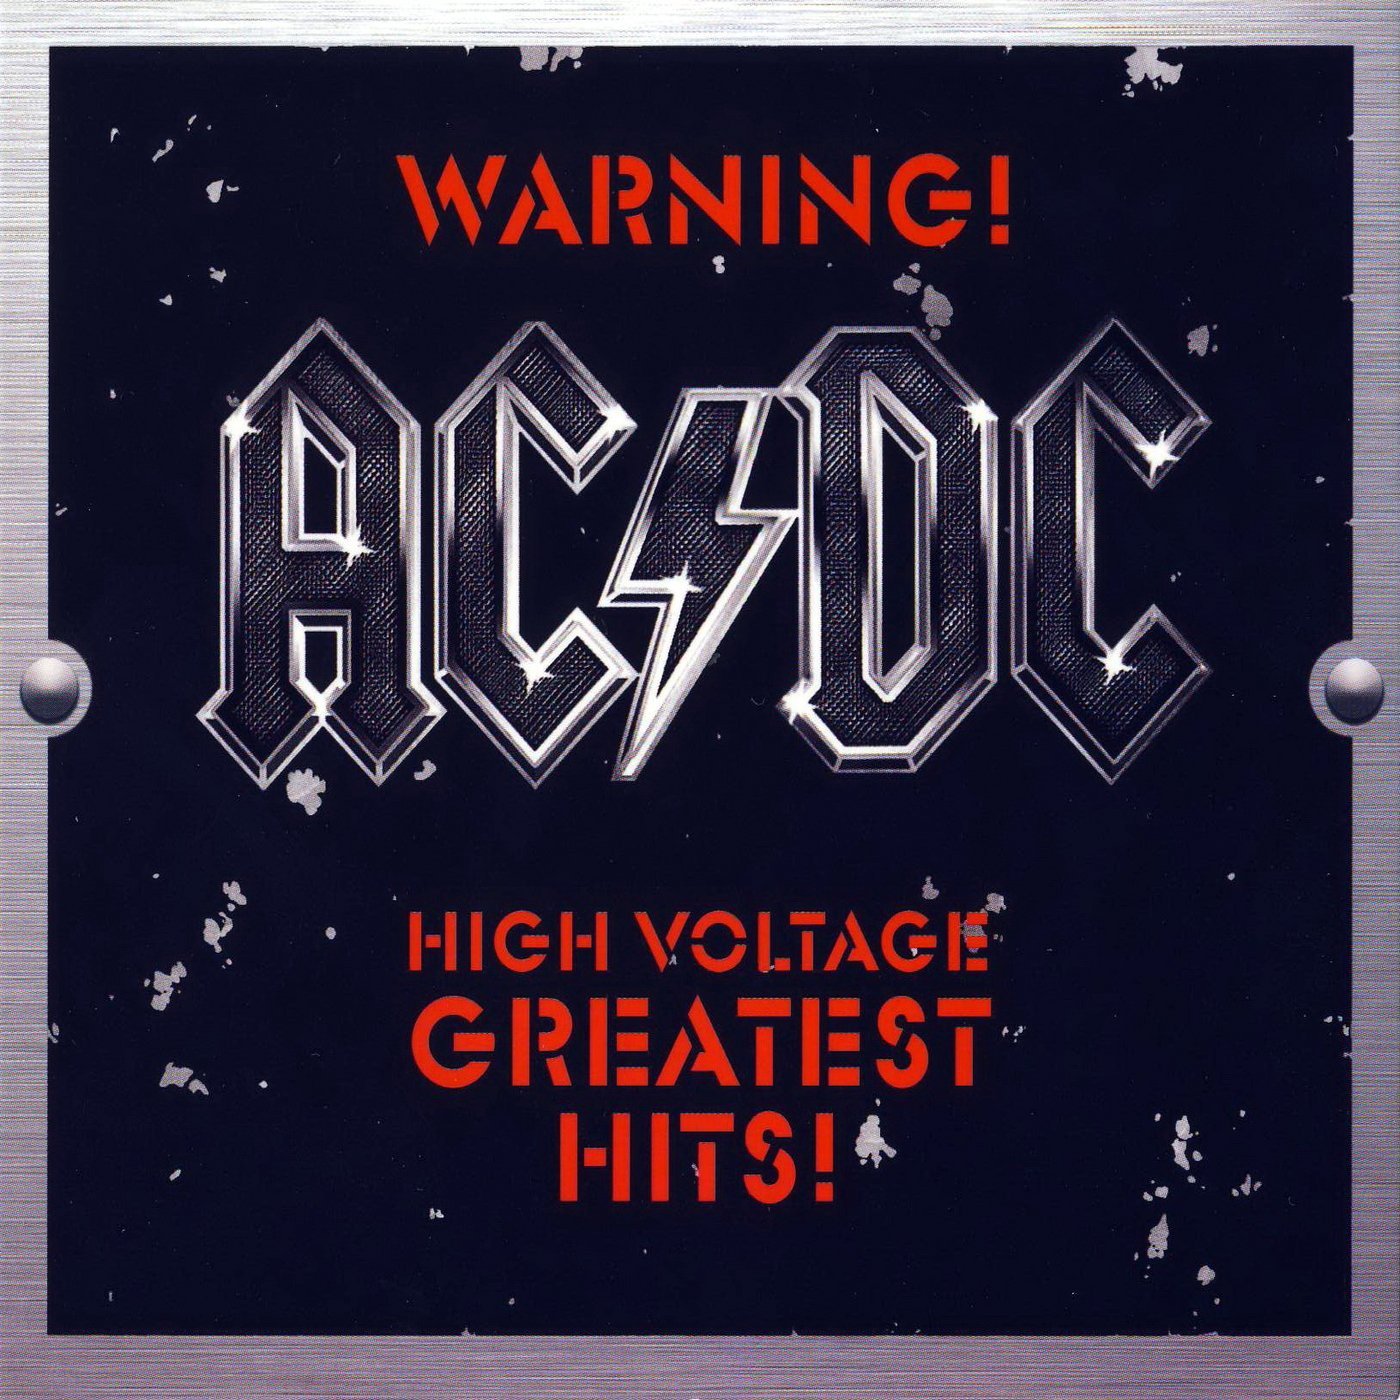 Warning! High Voltage (Greatest Hits!) AC/DC